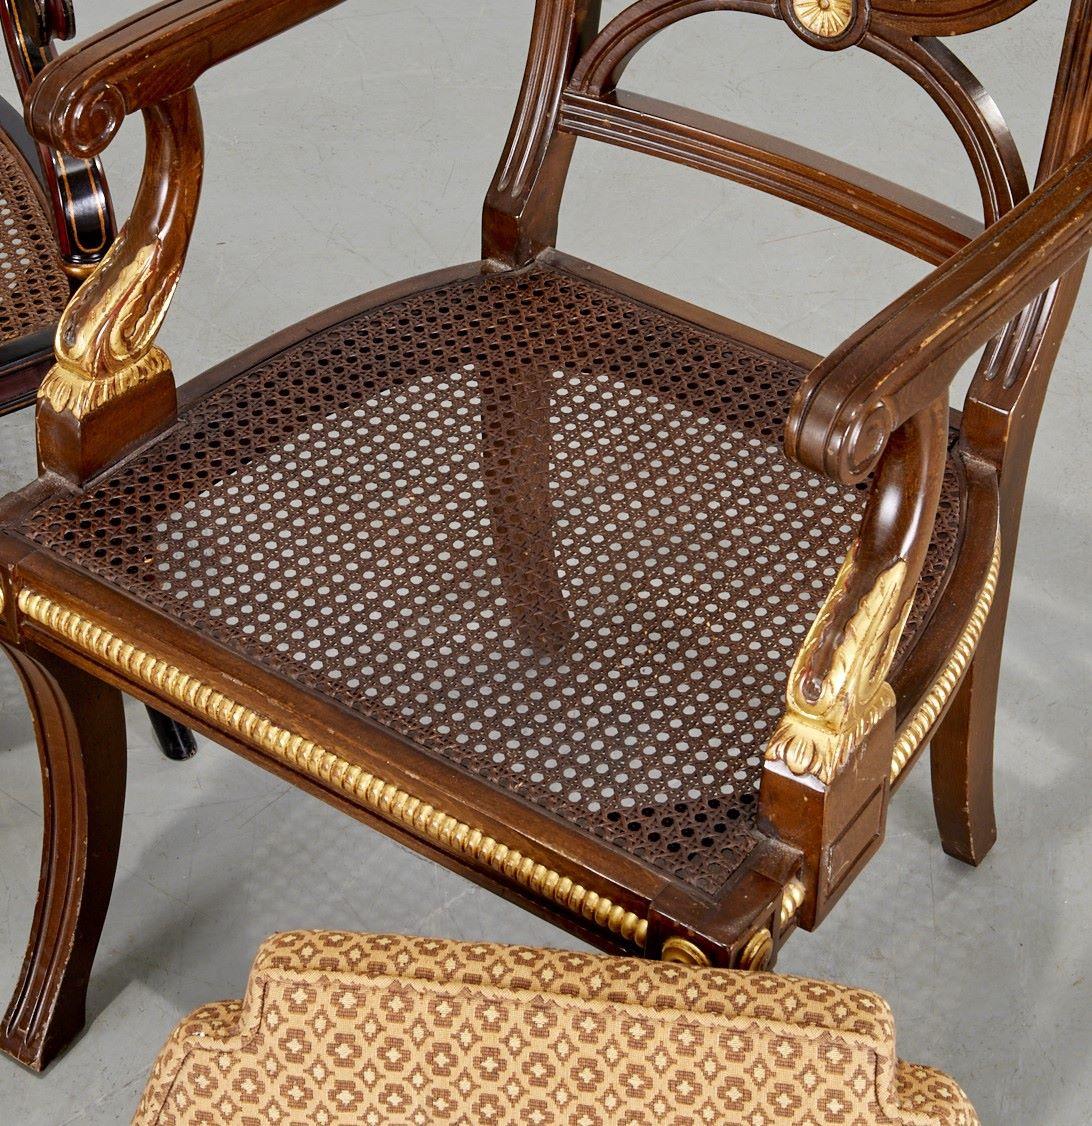 American Regency Style Armchair with Cane Seat with Gilt Folate Design and Medallions  For Sale